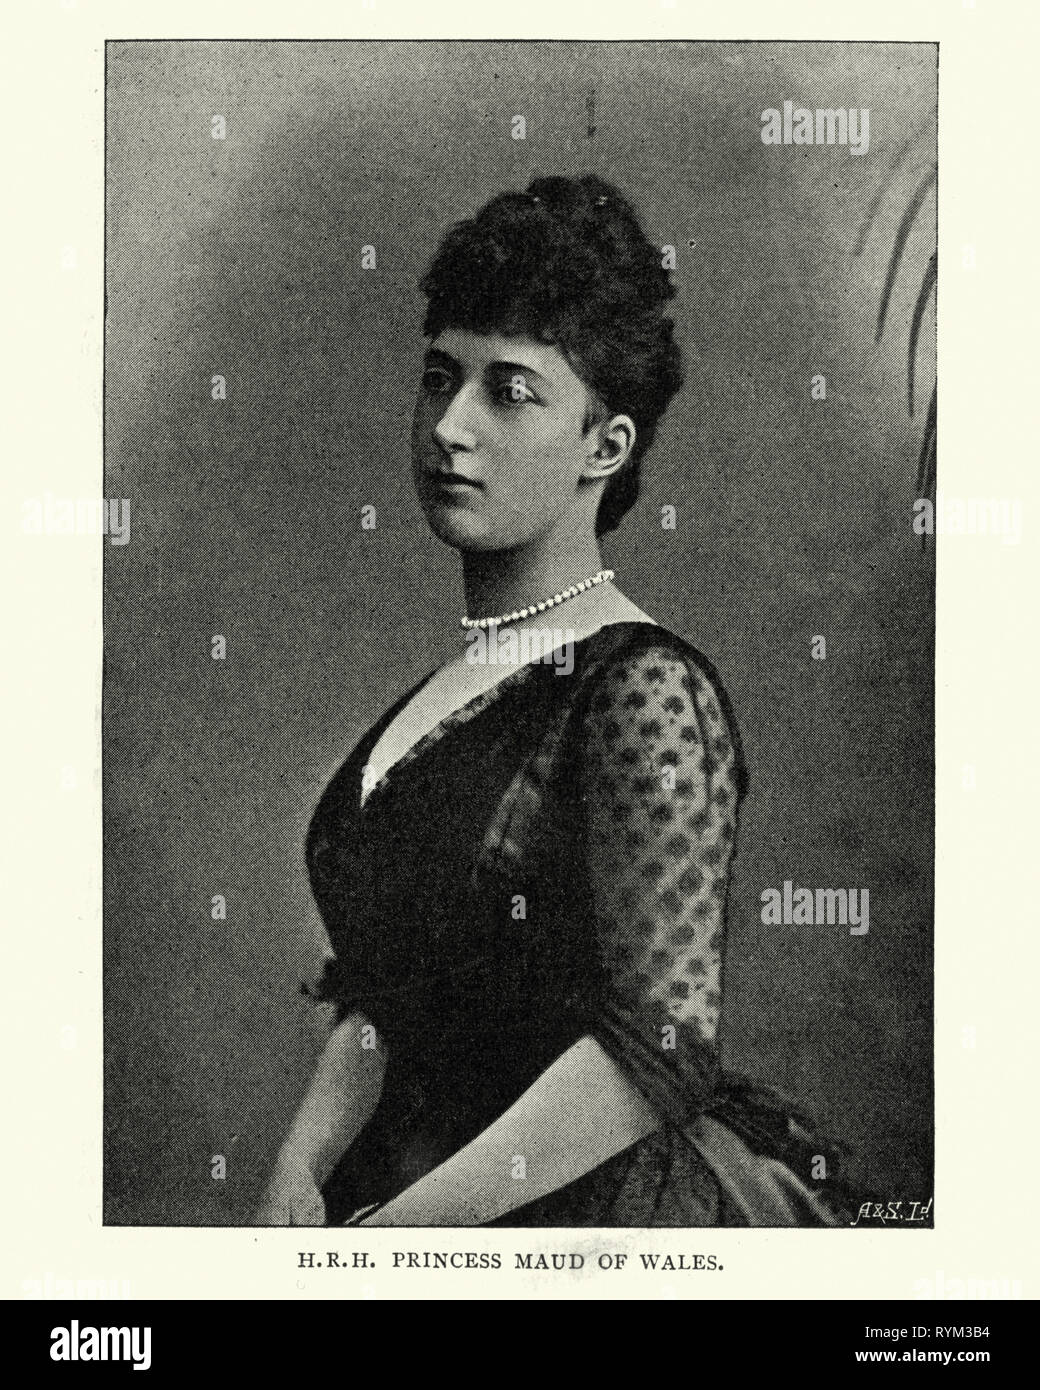 Vintage photograph of Princess Maud of Wales, was Queen of Norway as spouse of King Haakon VII. She was the youngest daughter of the British king Edward VII and Alexandra of Denmark. Stock Photo